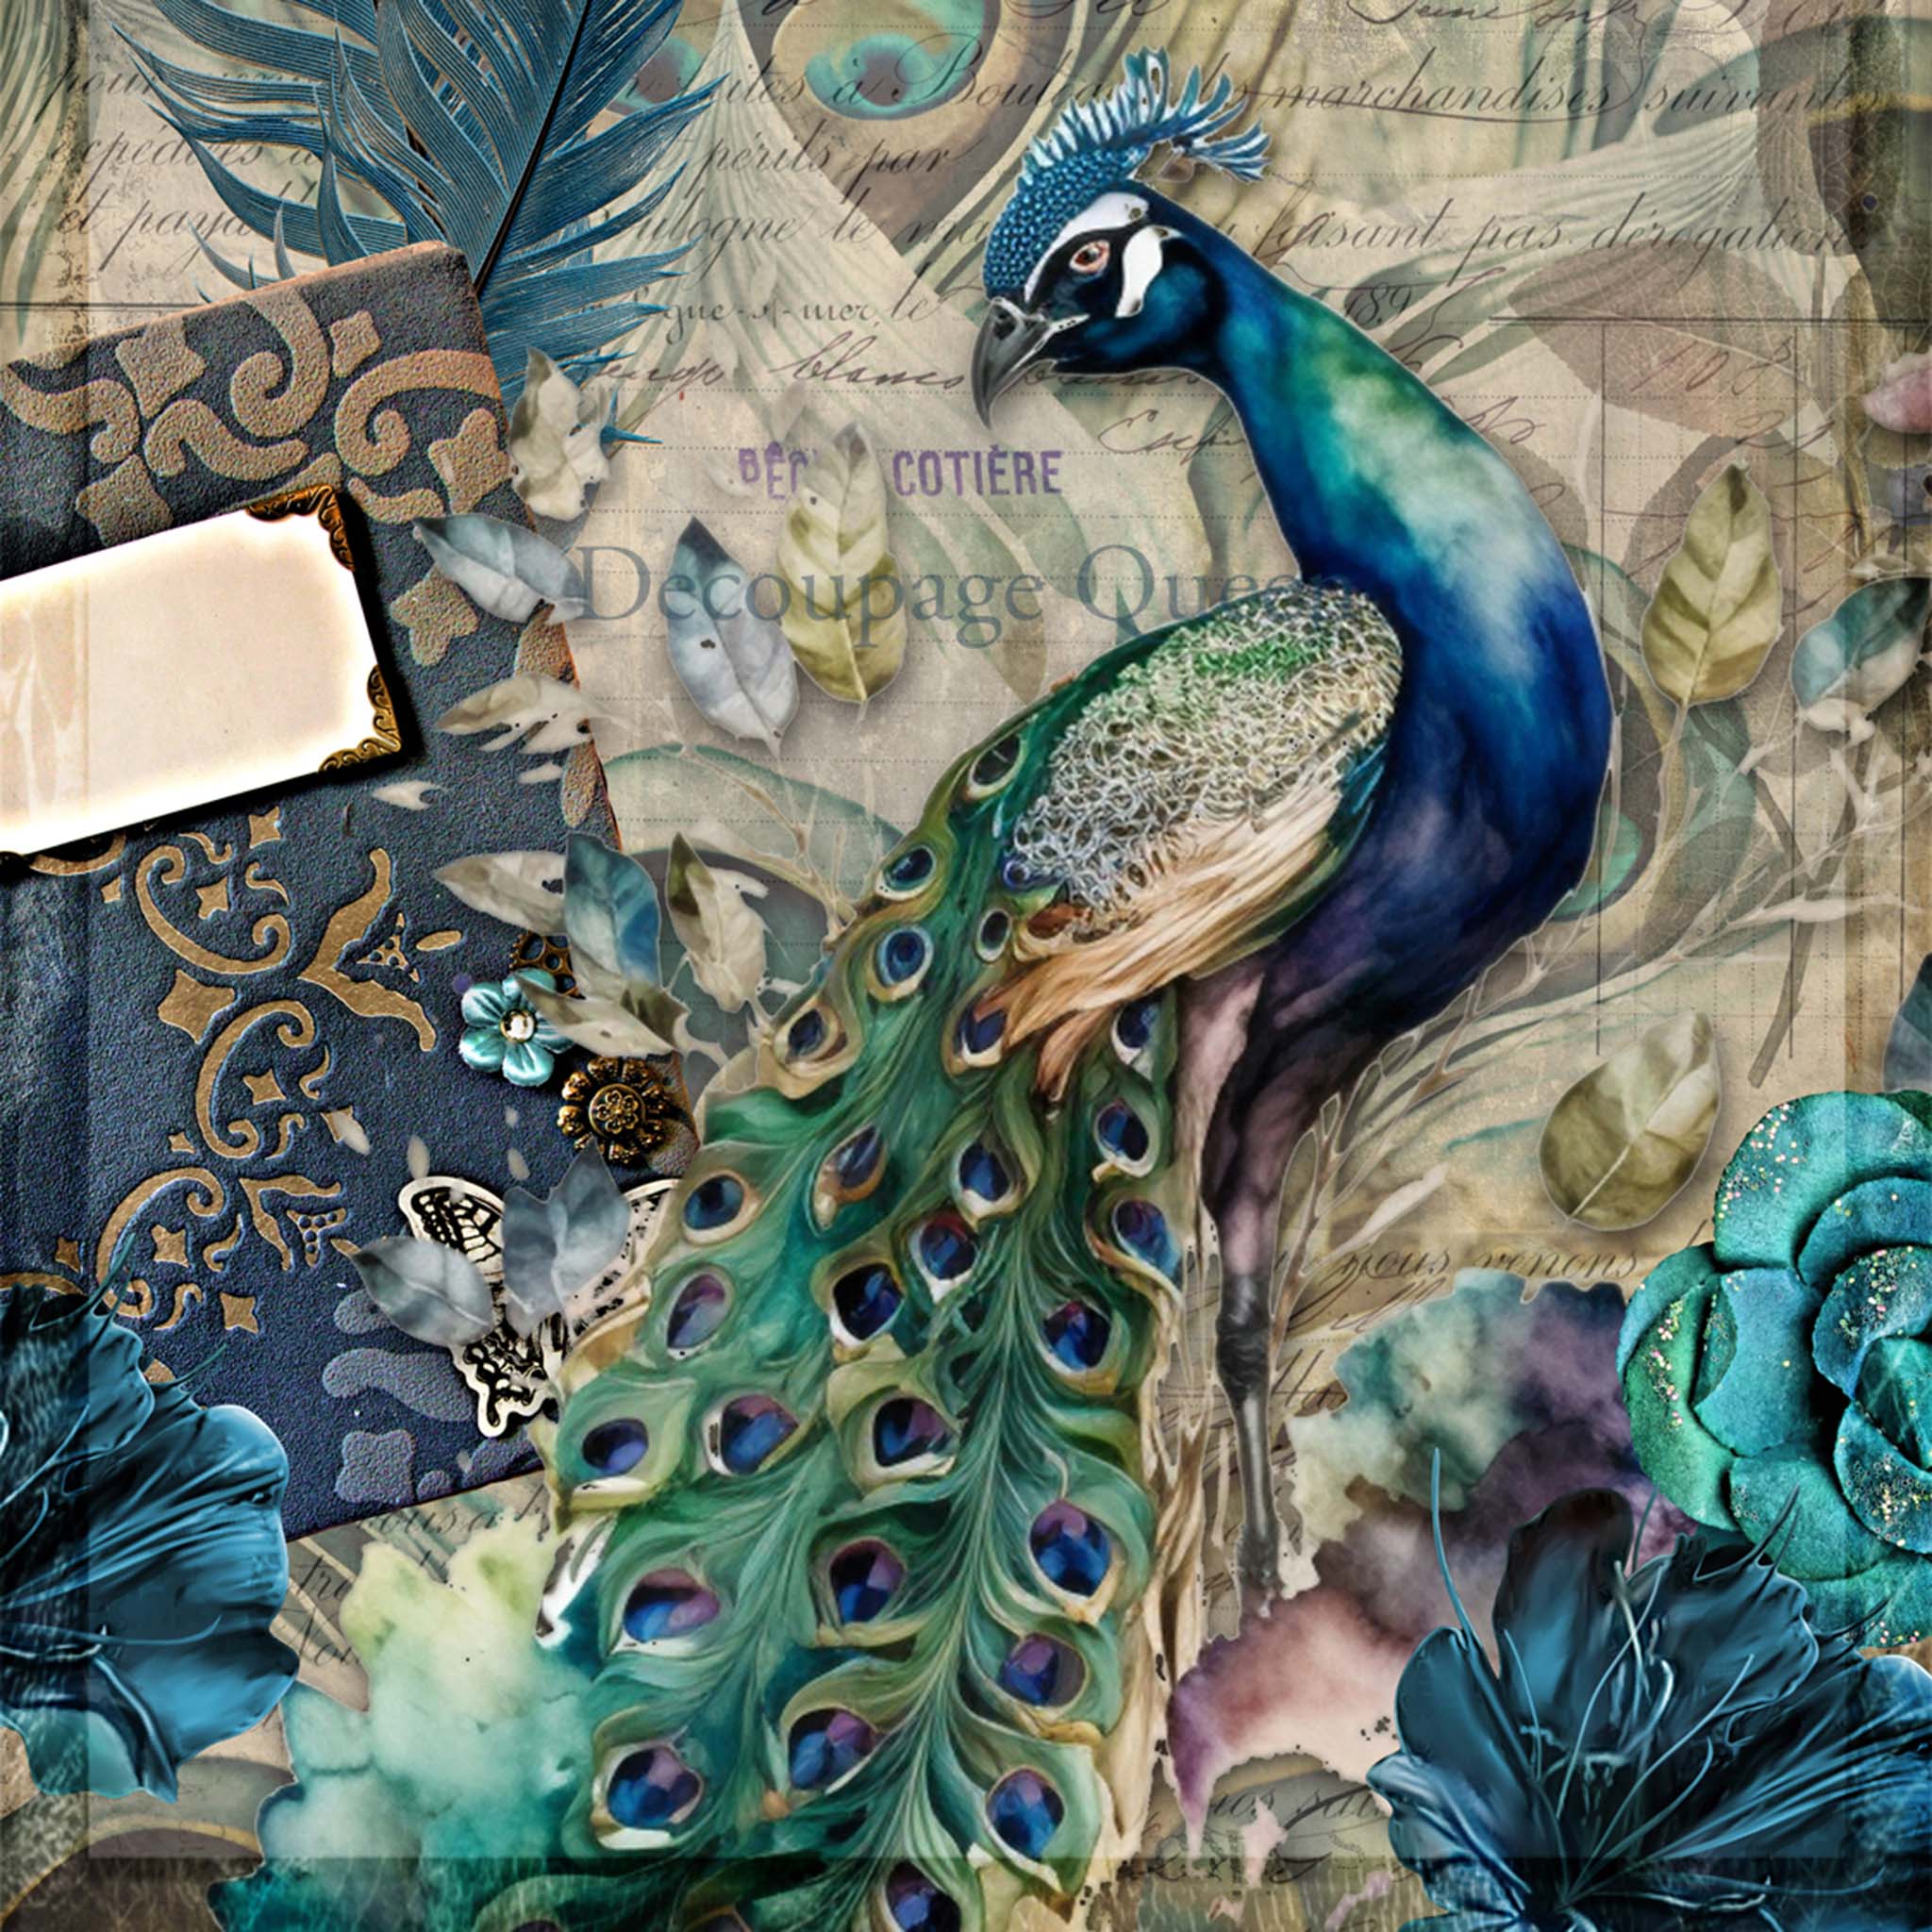 Close-up of an A0 rice paper design that features a vintage document adorned with a majestic peacock and delicate florals.